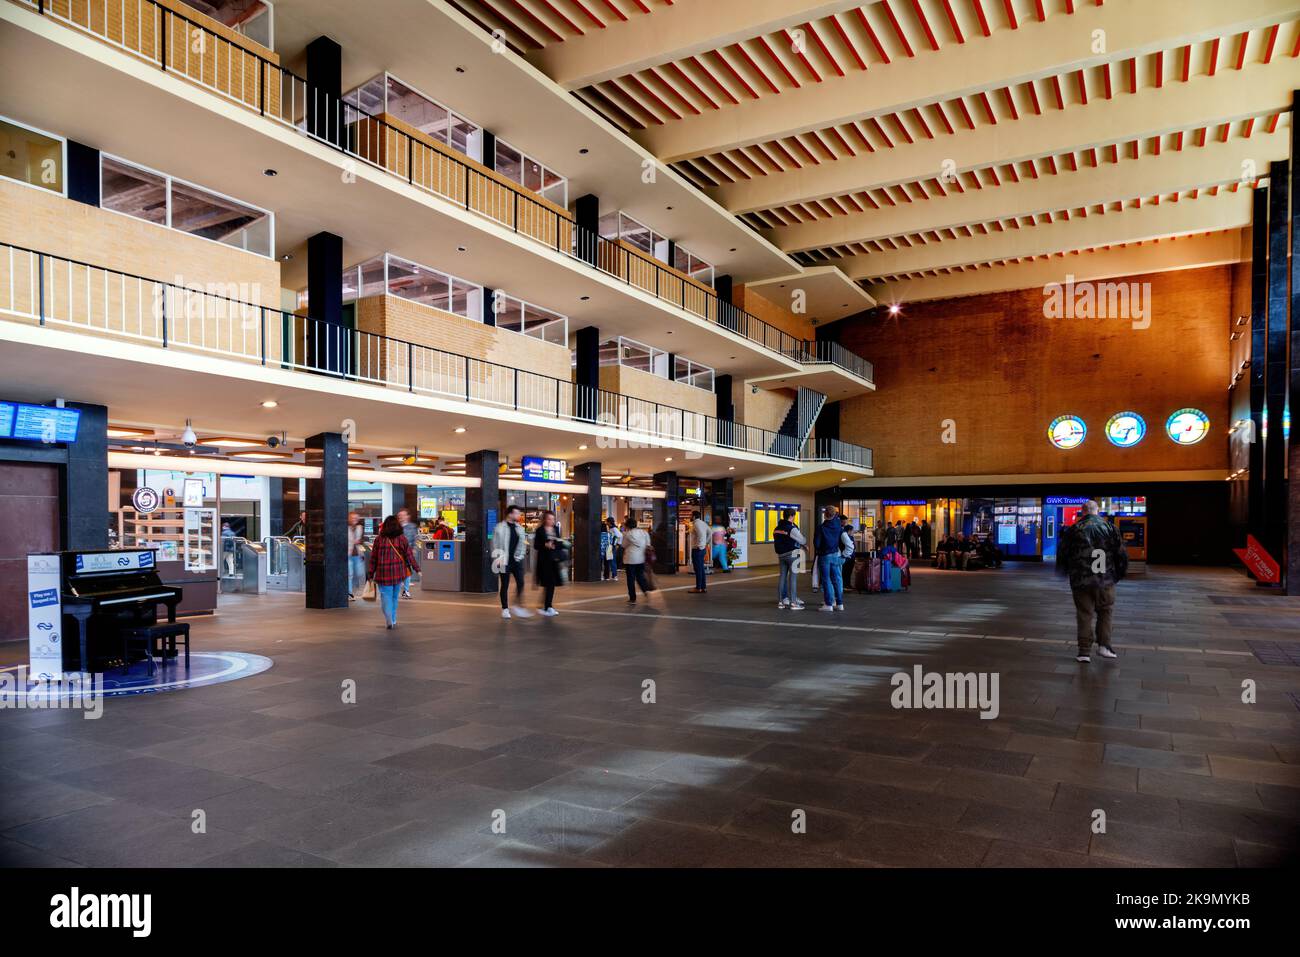 The railway station in Eindhoven, Netherlands Stock Photo